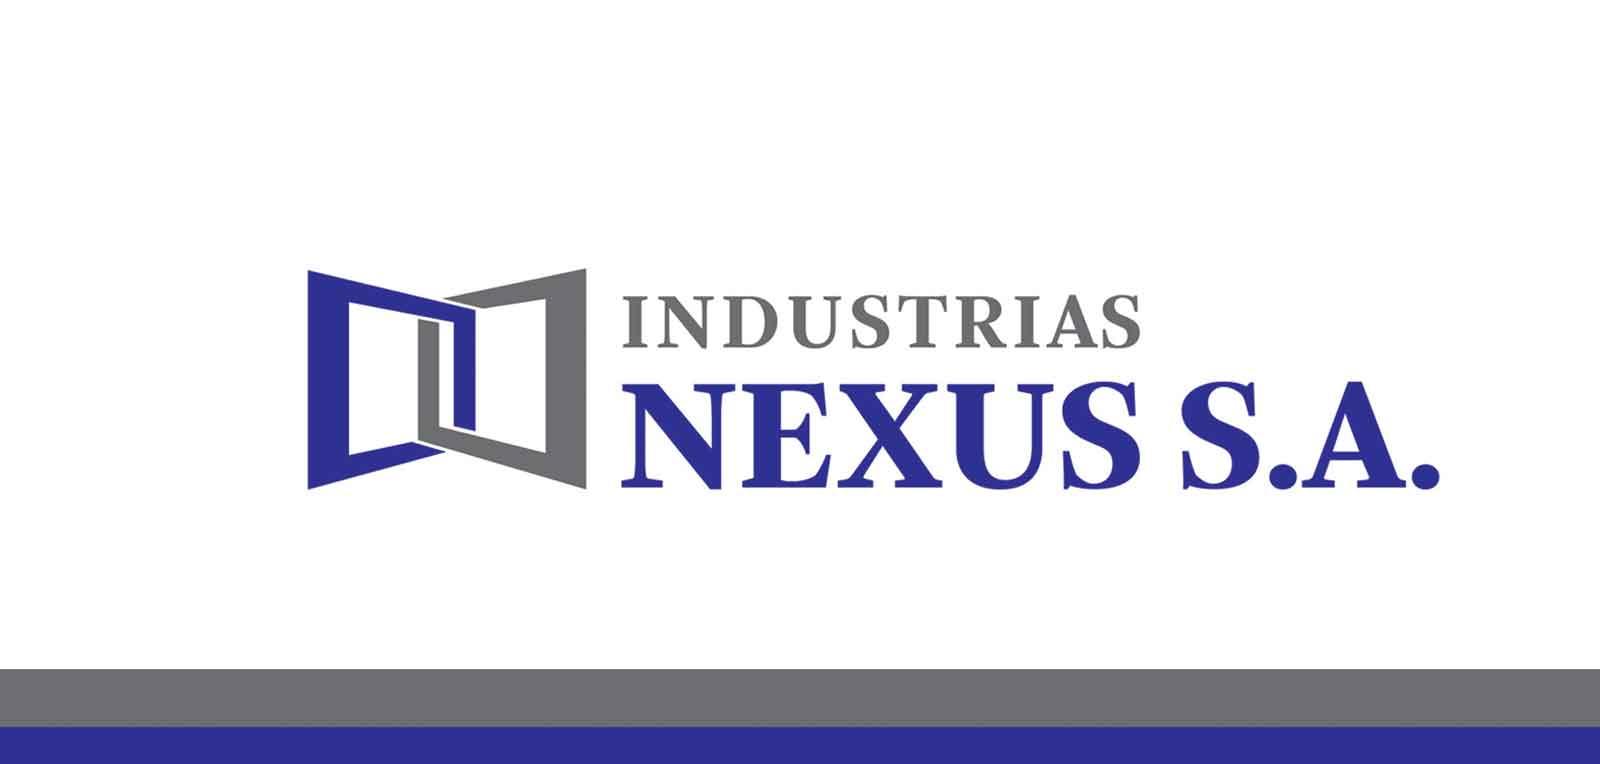 Industrias Nexus S.A., your investment opportunity